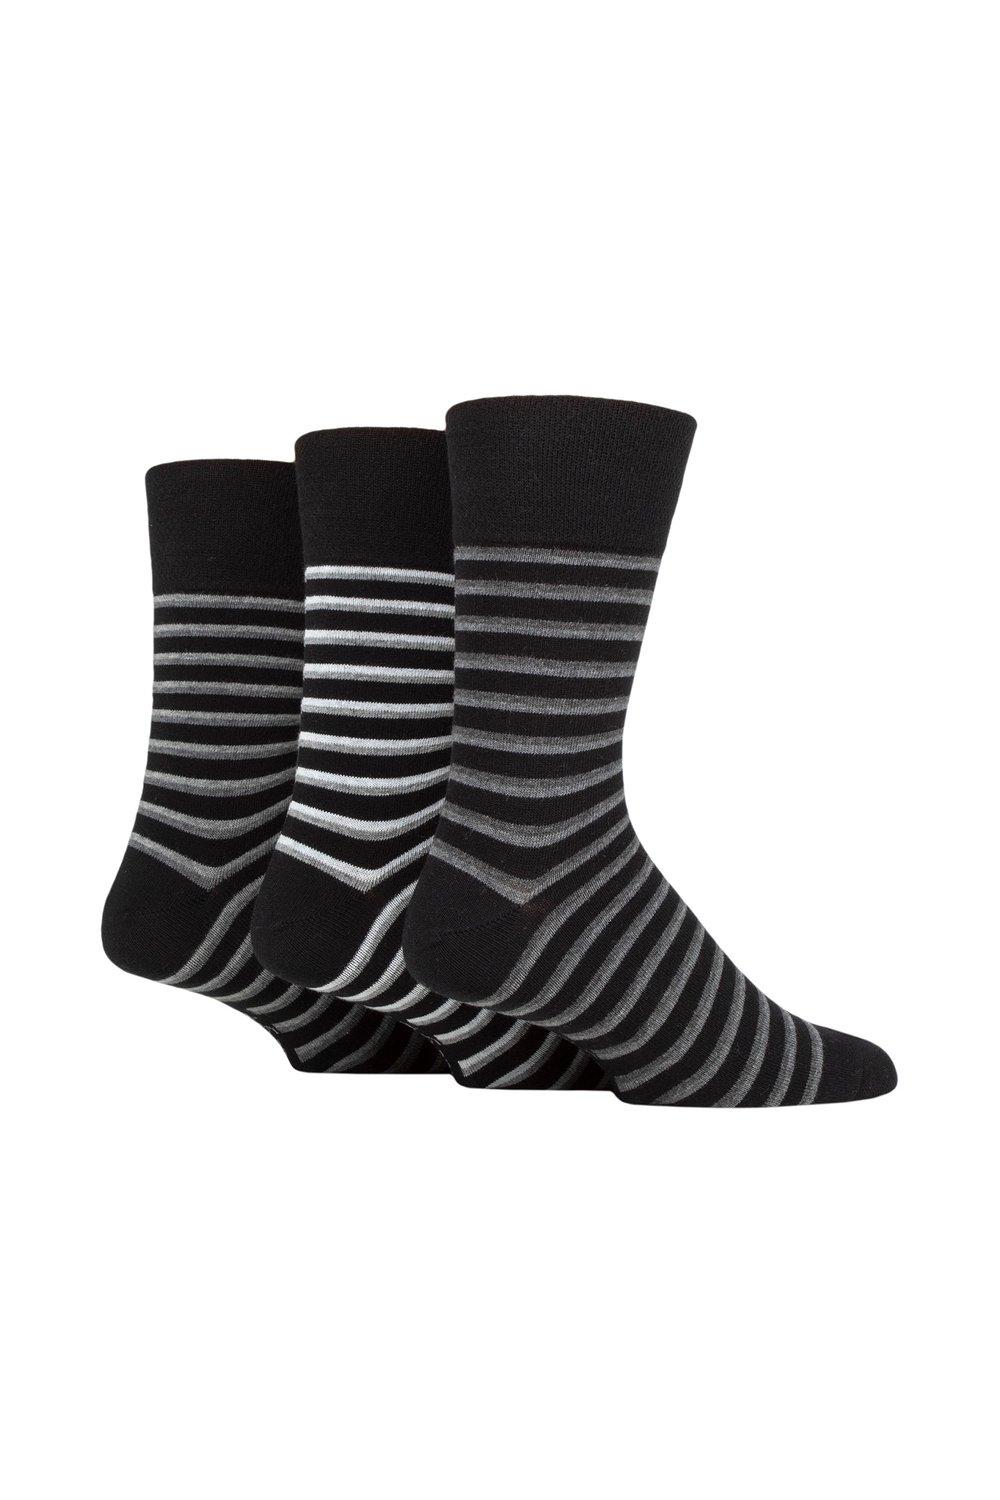 3 Pair Argyle Patterned and Striped Socks